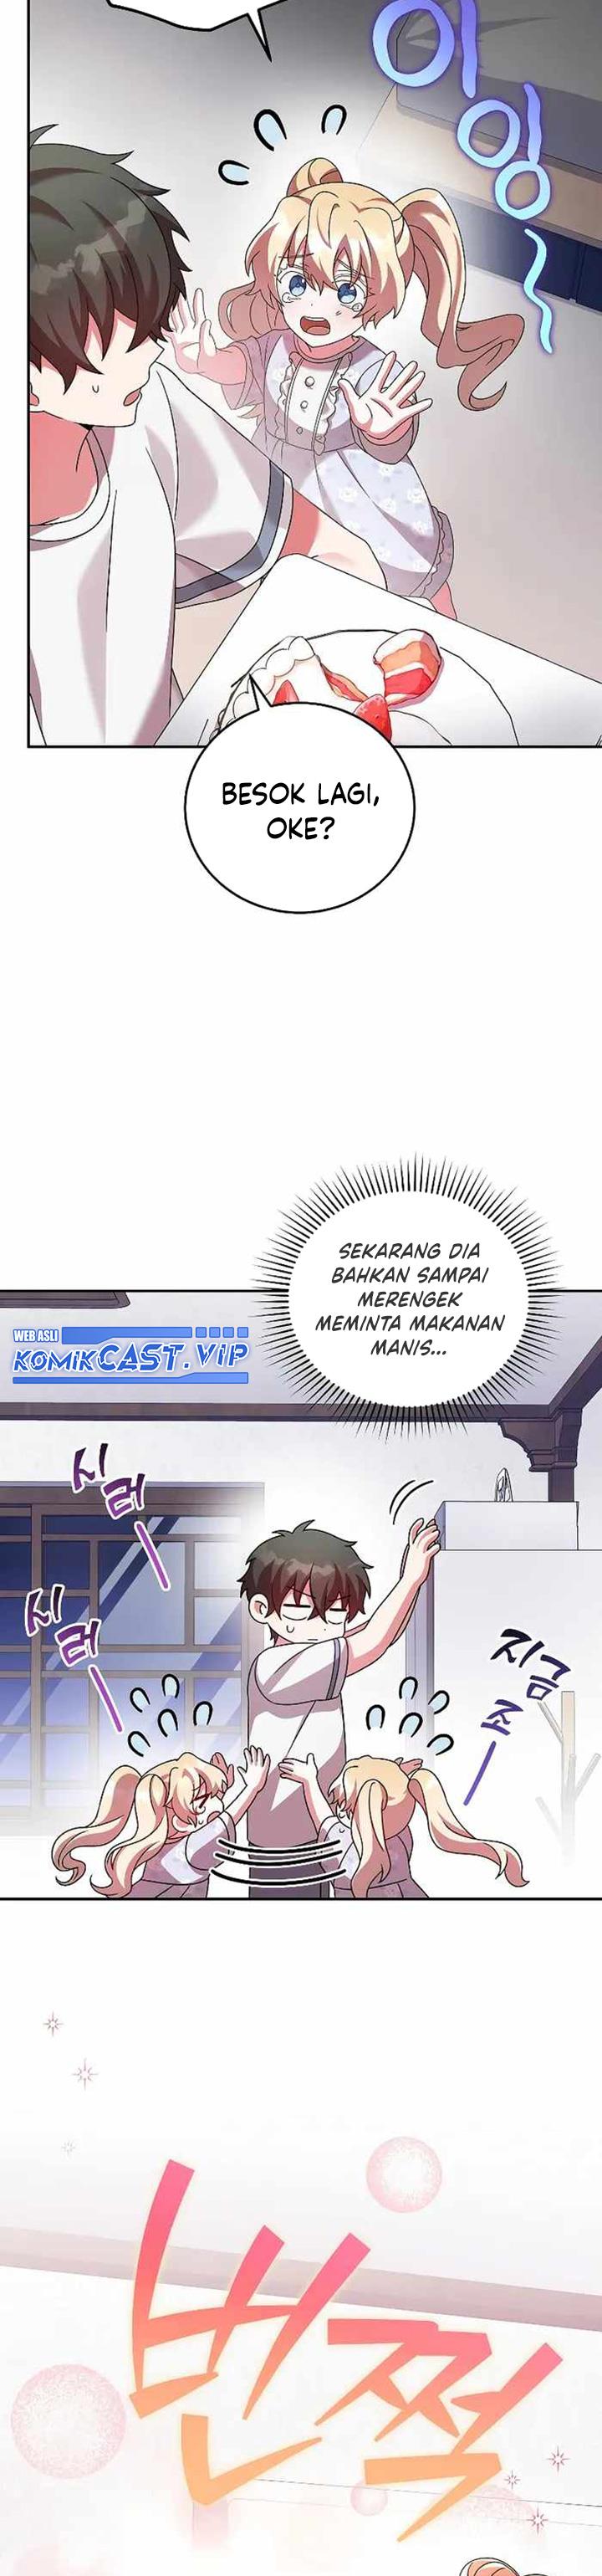 The Novel’s Extra Chapter 75